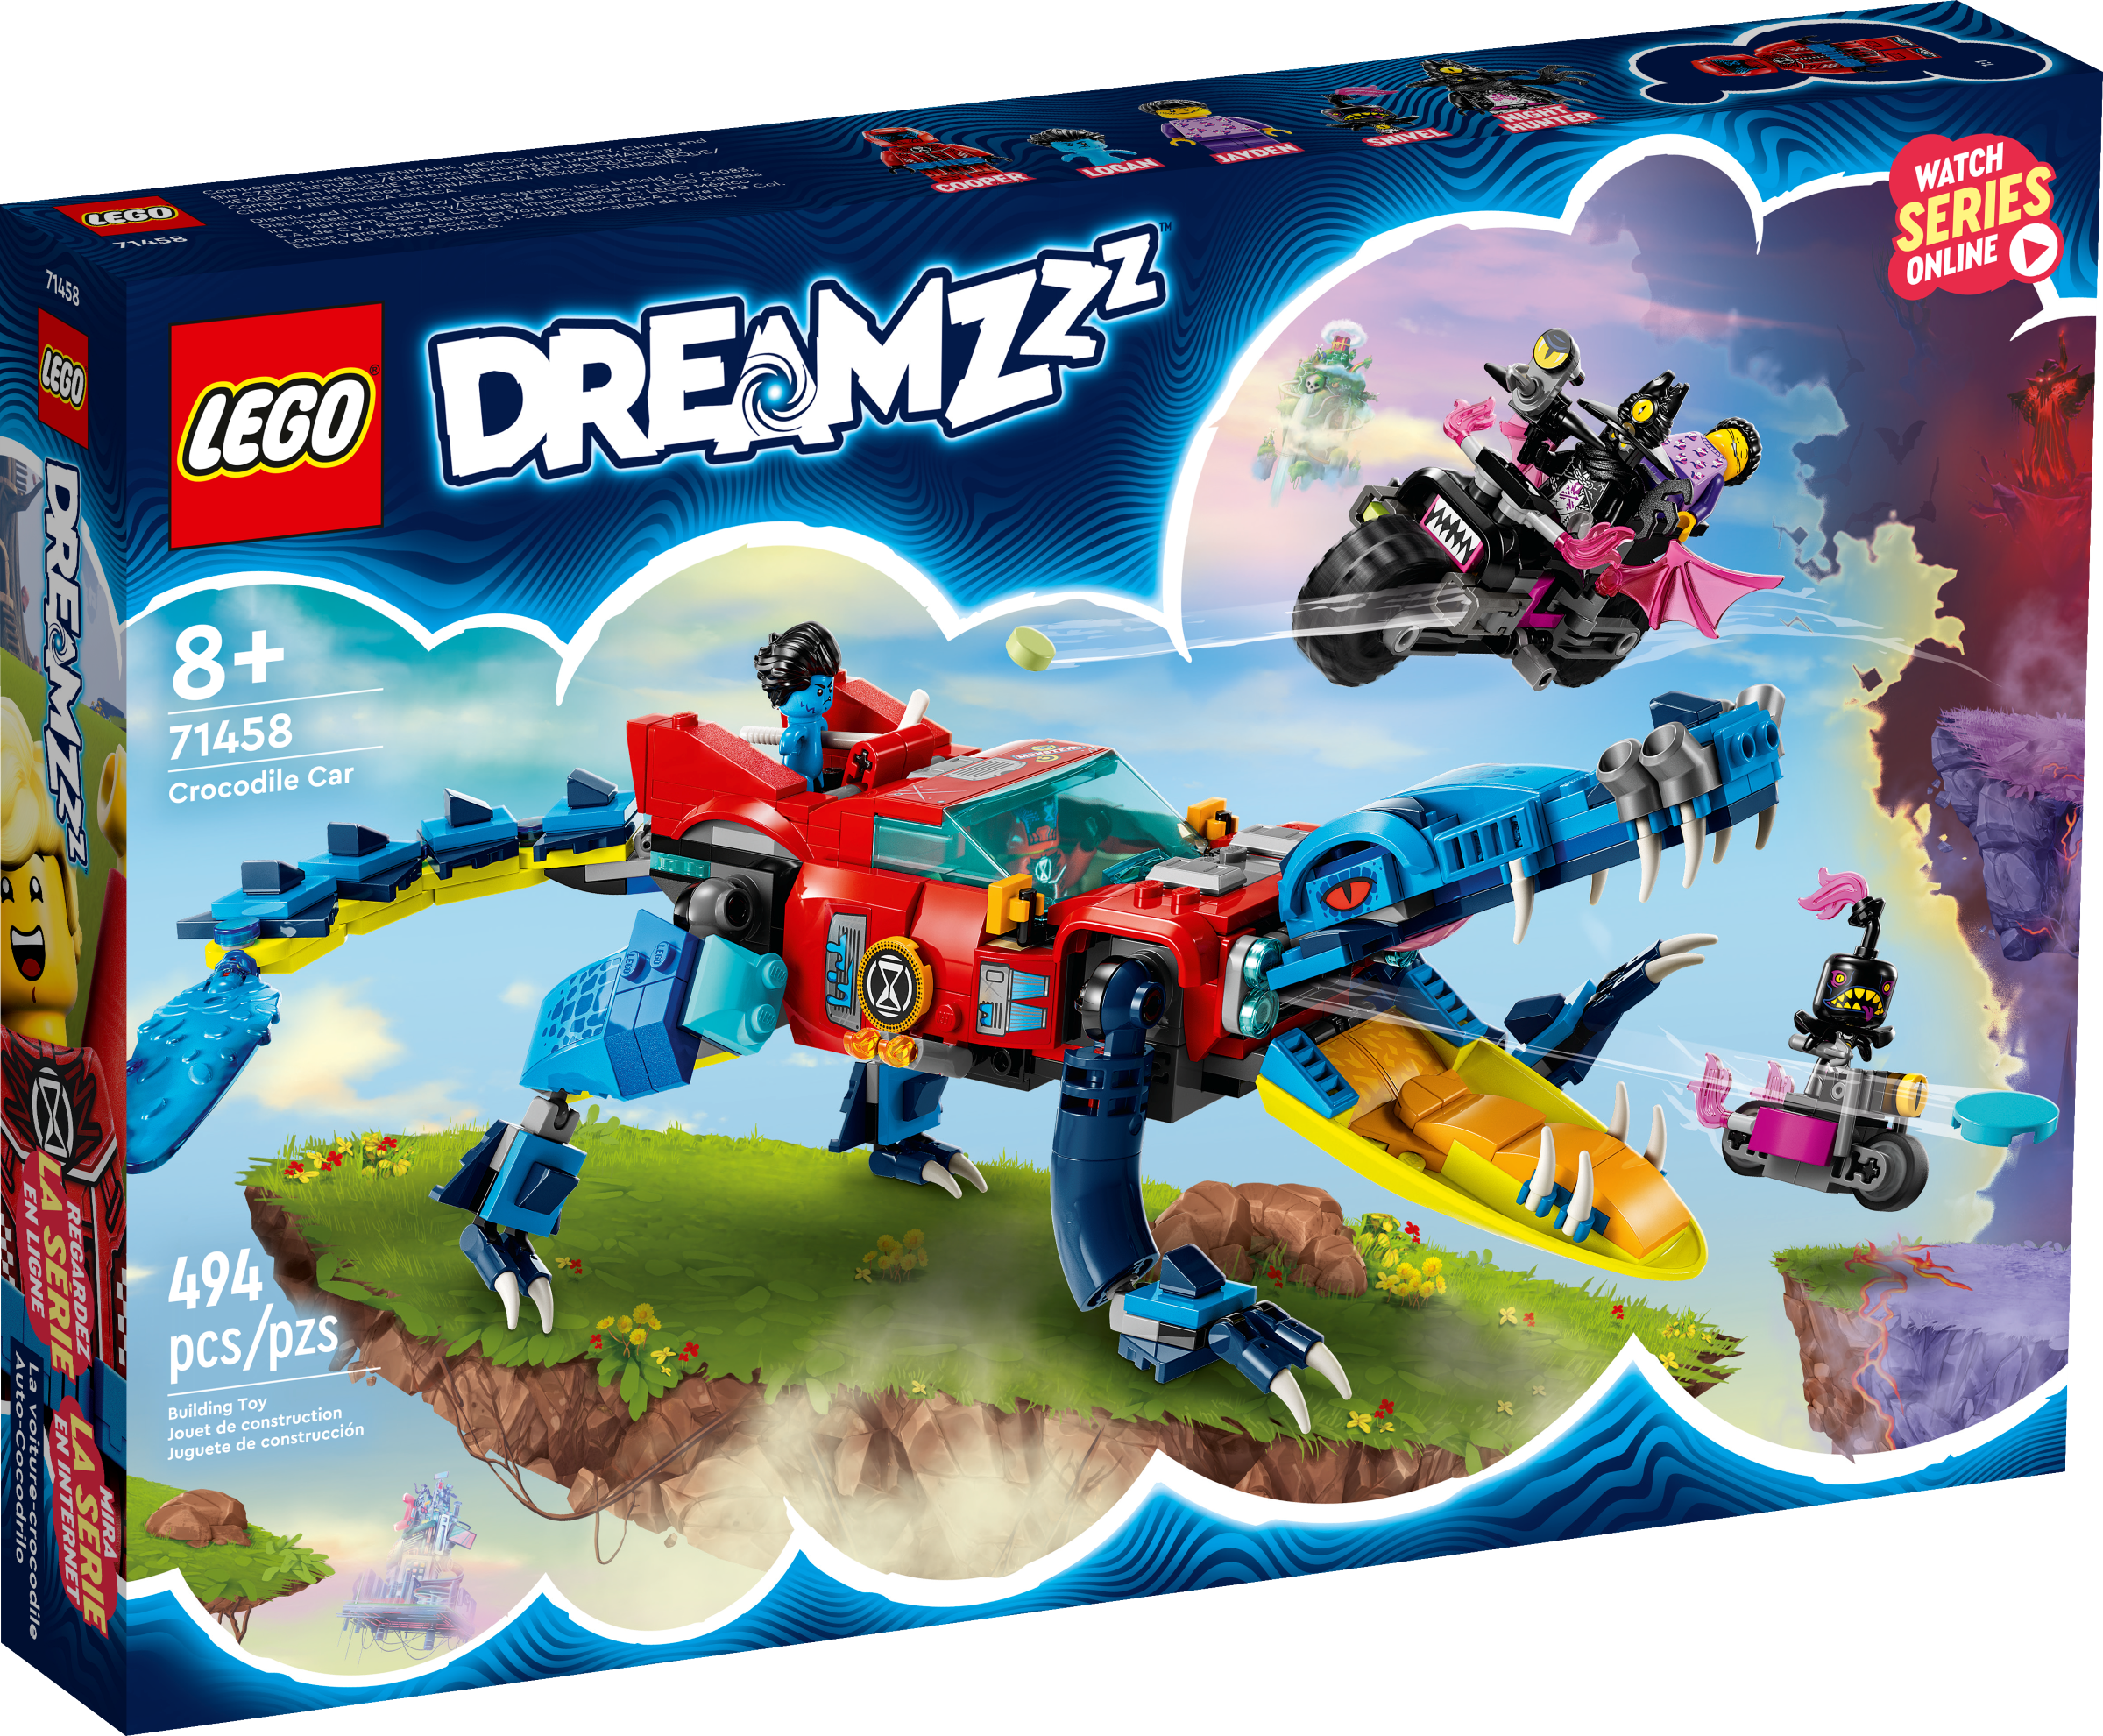 Crocodile Car 71458 | LEGO® DREAMZzz™ | Buy online at the Official 